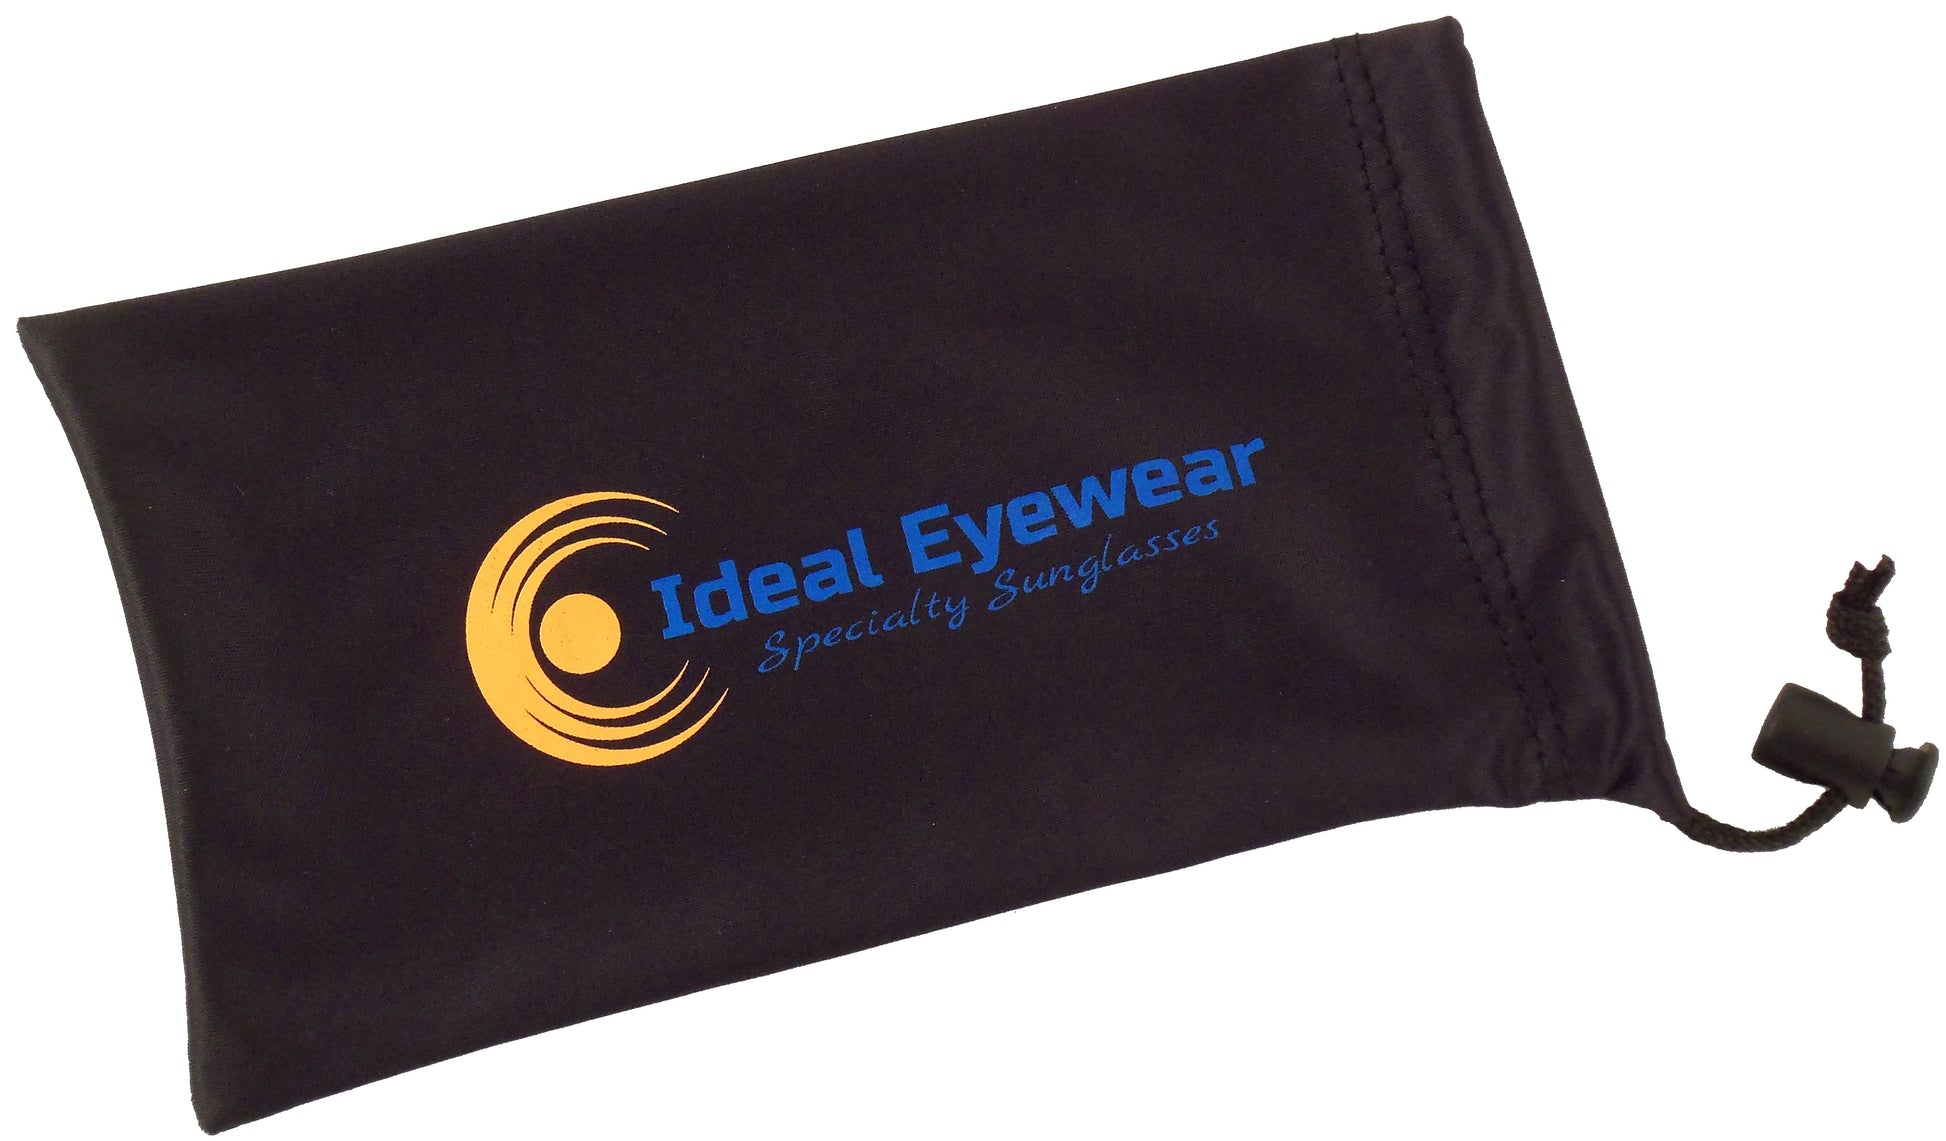 Night Driving Fit Over Sunglasses with Yellow Lenses - Wear Over Prescription Glasses for Men or Women - Ideal Eyewear